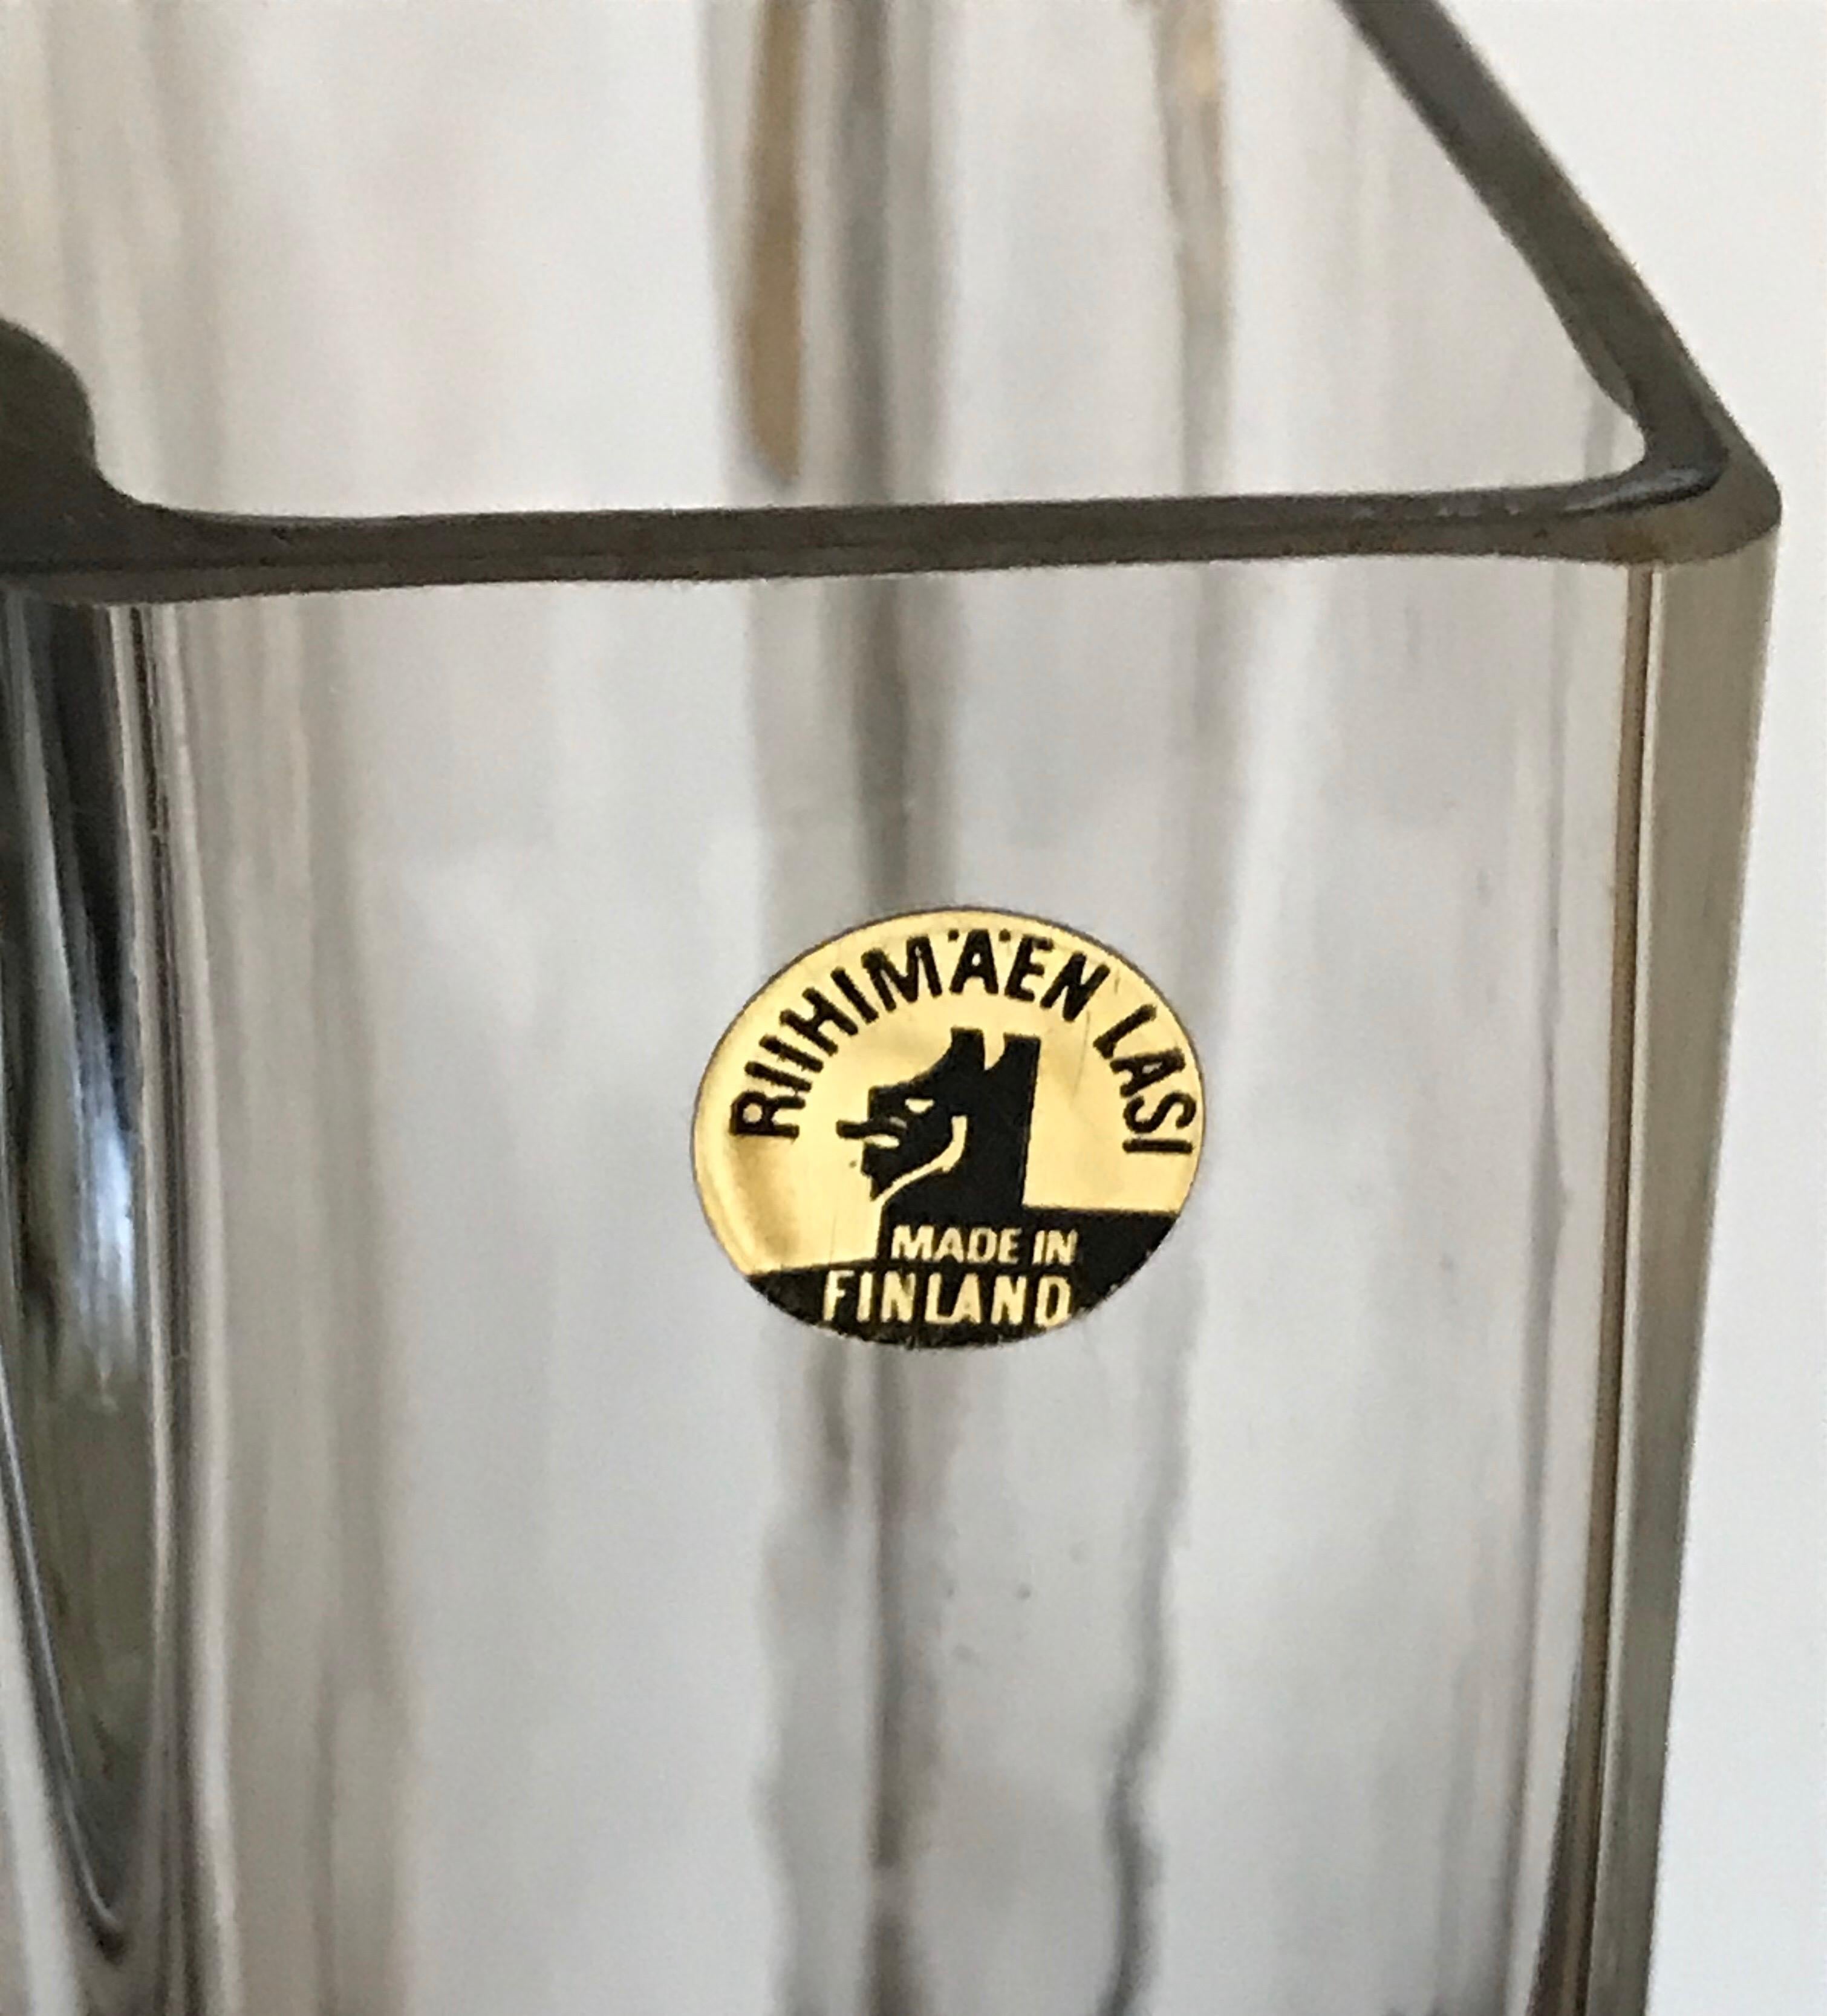 Mid Century Modern Clear Crystal Vase by Tamara Aladin, Riihimaen Lasi, Finland In Good Condition For Sale In Bedford Hills, NY